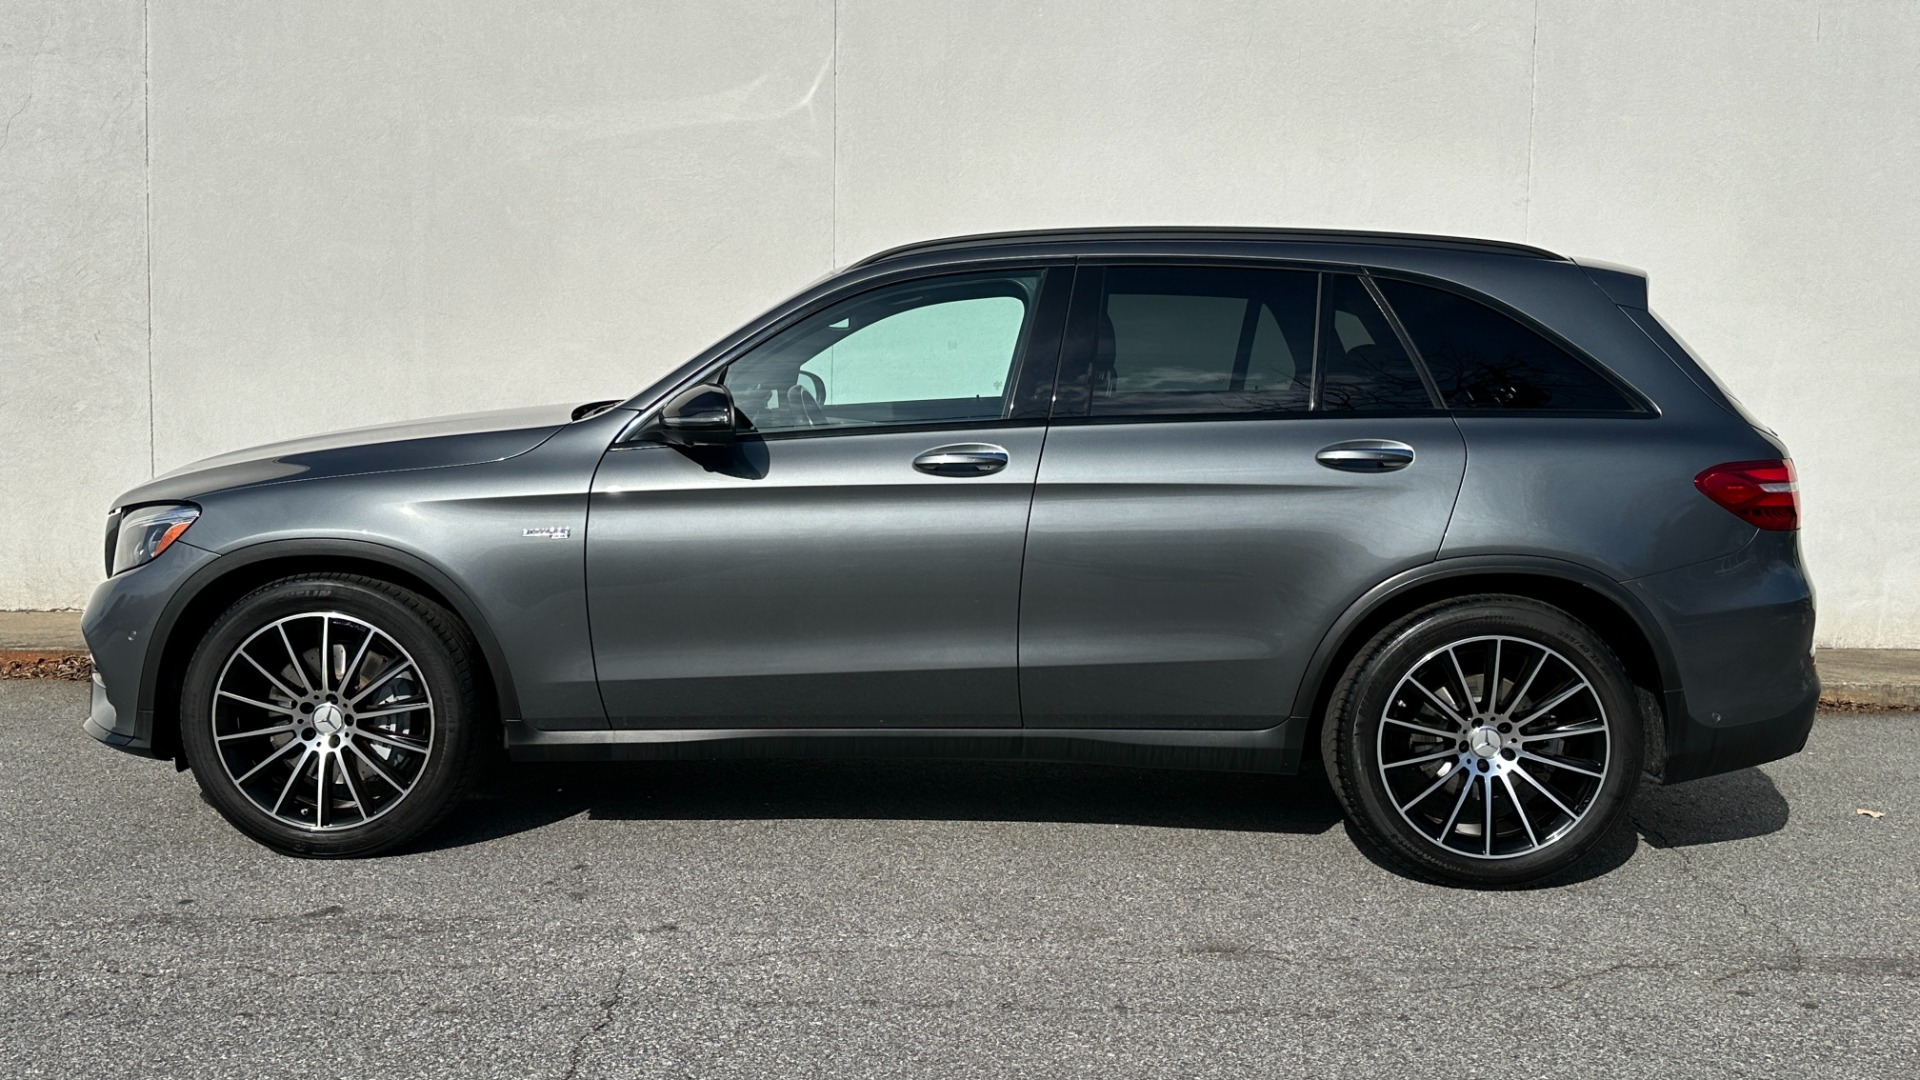 Used 2019 Mercedes-Benz GLC AMG GLC43 / CARBON FIBER / PERFORMANCE STEERING WHEEL / NIGHT PACKAGE for sale $45,995 at Formula Imports in Charlotte NC 28227 6